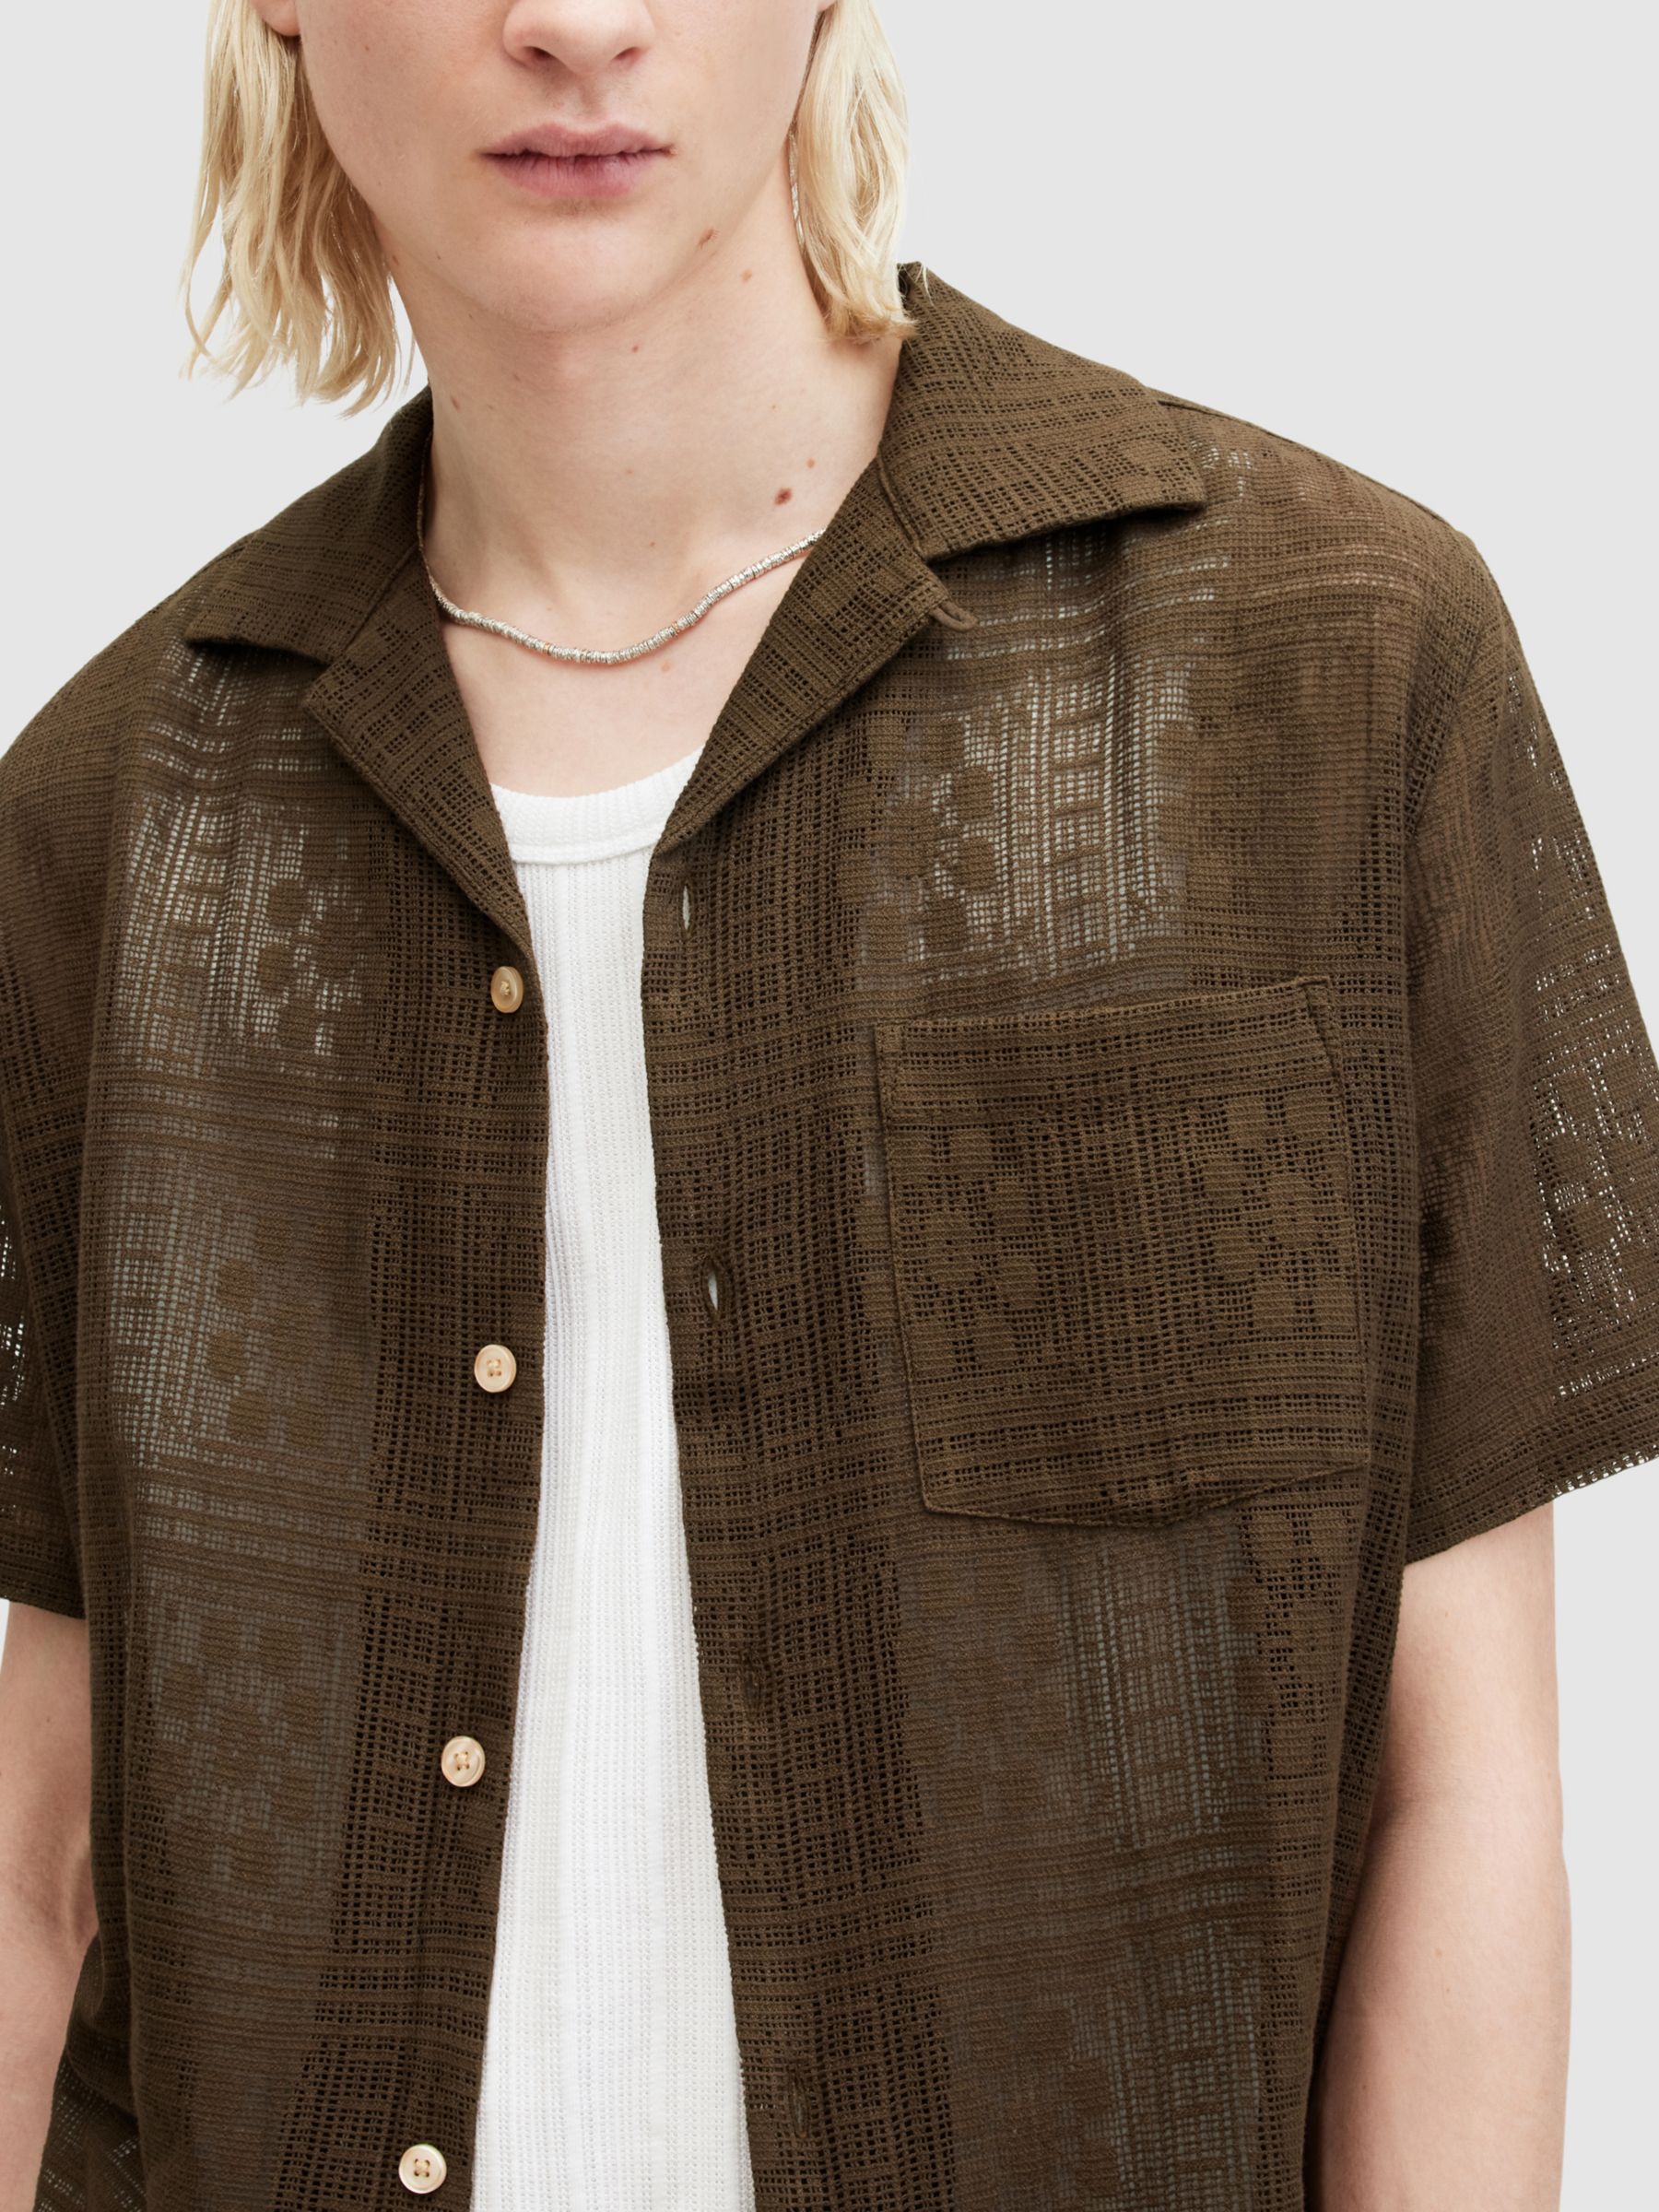 Buy AllSaints Caleta Lace Textured Relaxed Fit Shirt Online at johnlewis.com